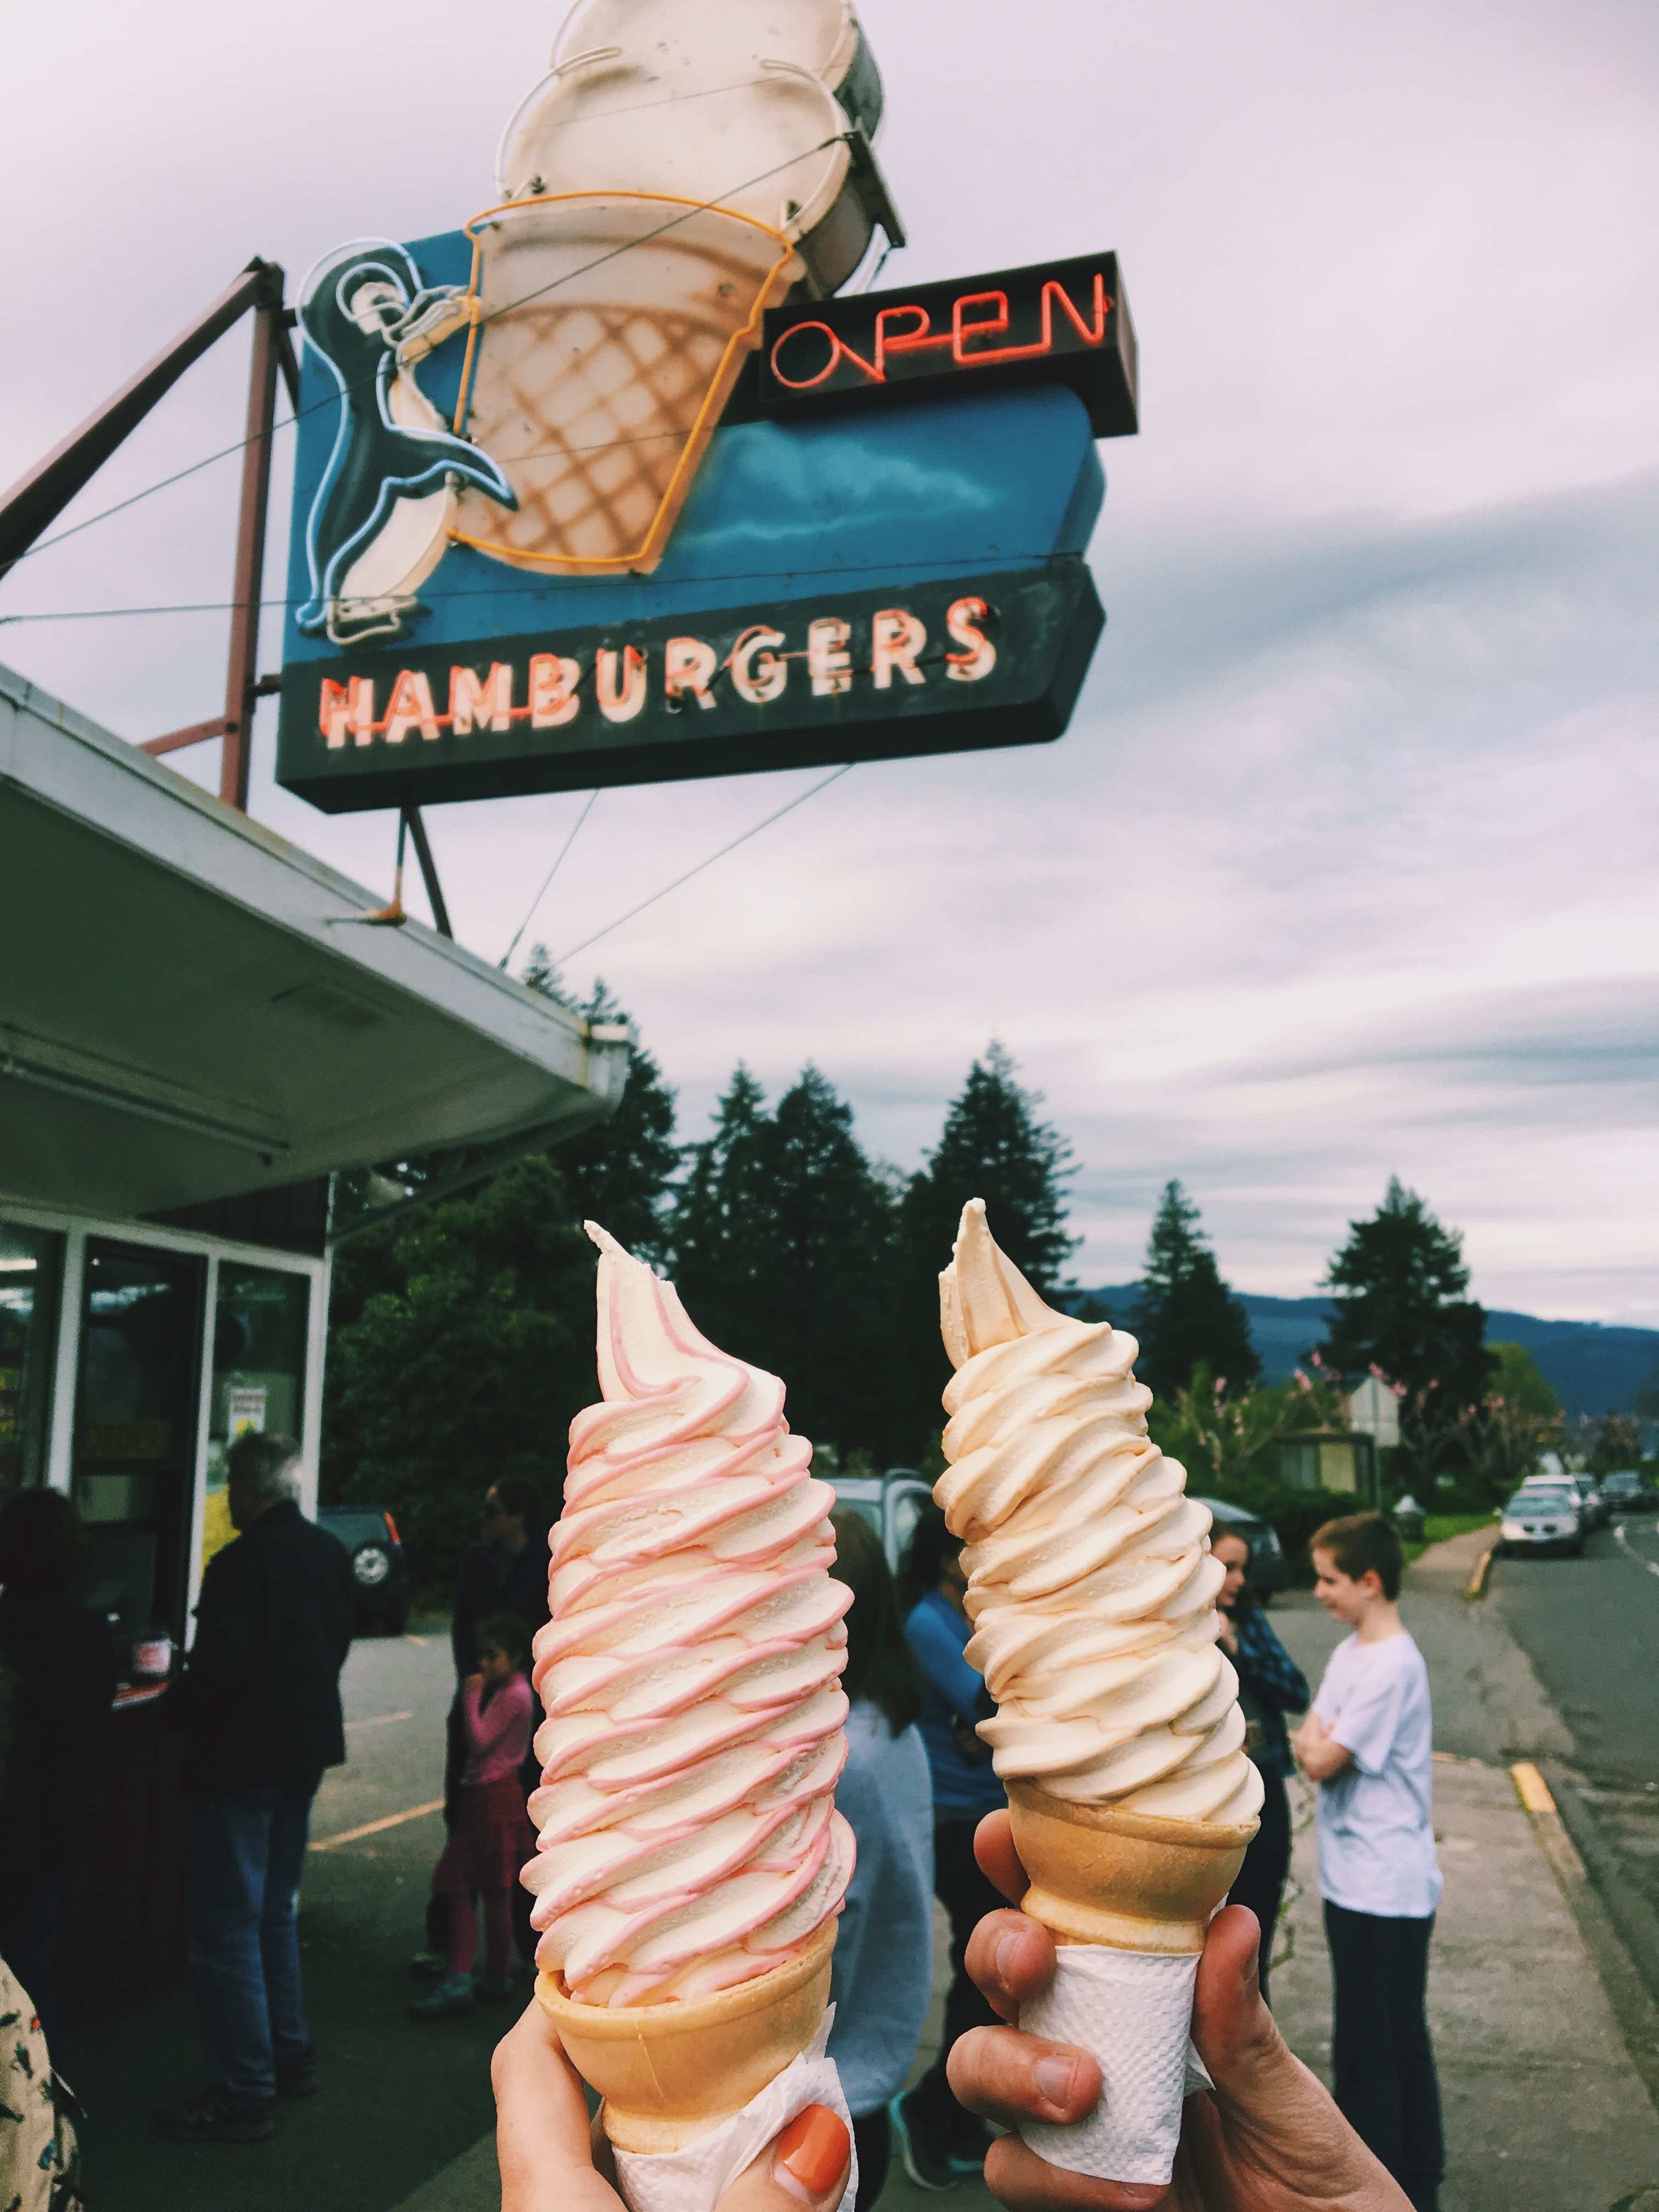 Two large ice creams at the East wind sign